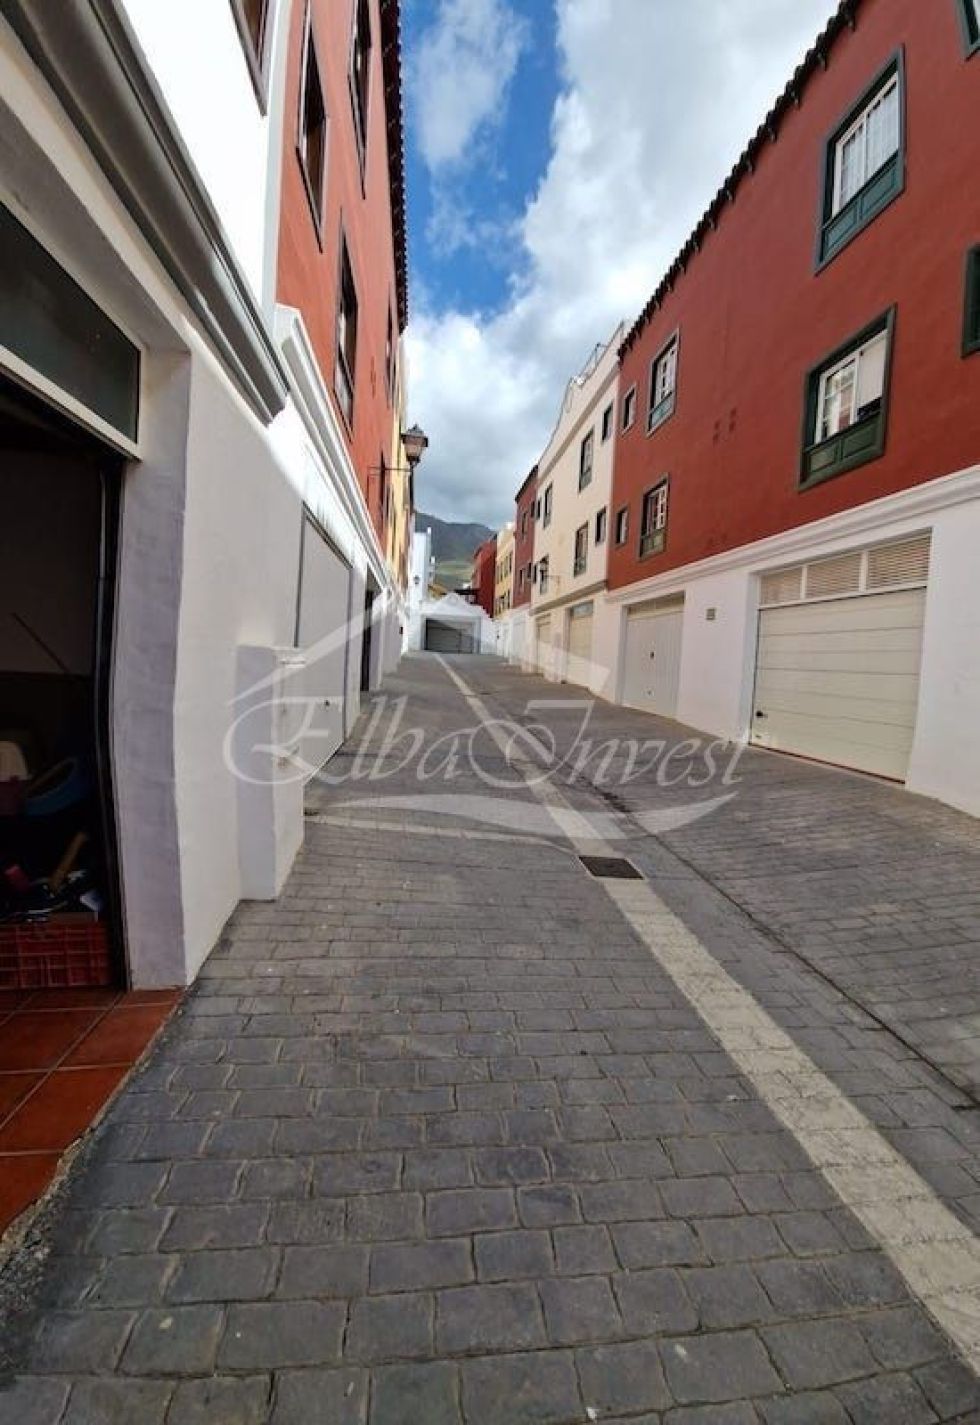 Apartment for sale in  Adeje, Spain - 5458